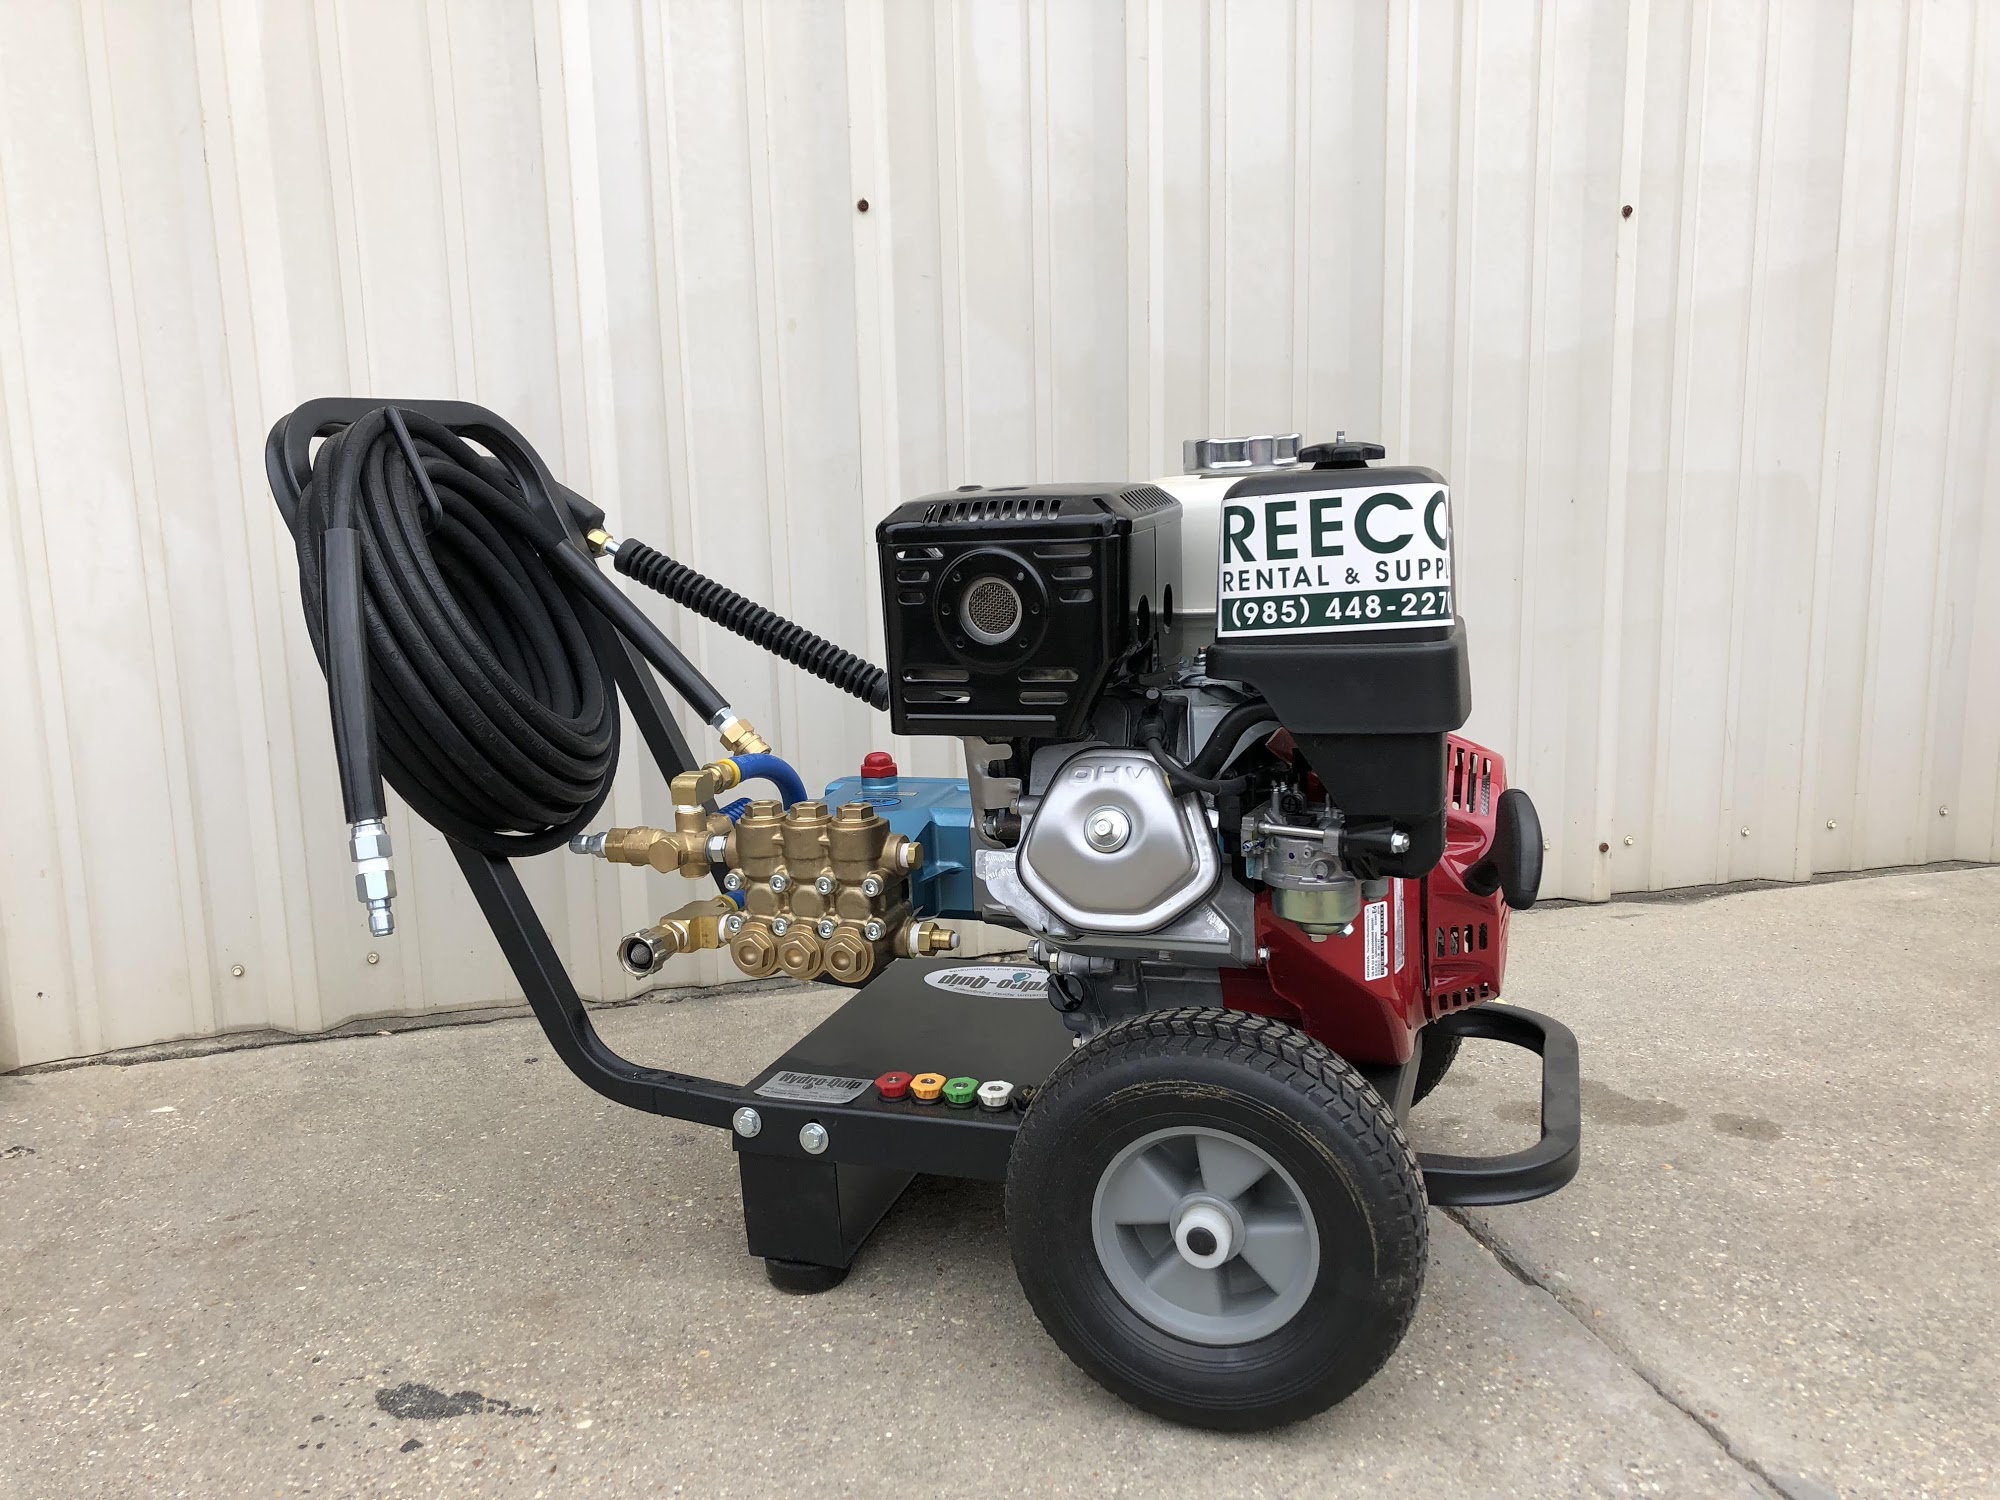 Reeco Rental and Supply, Inc.